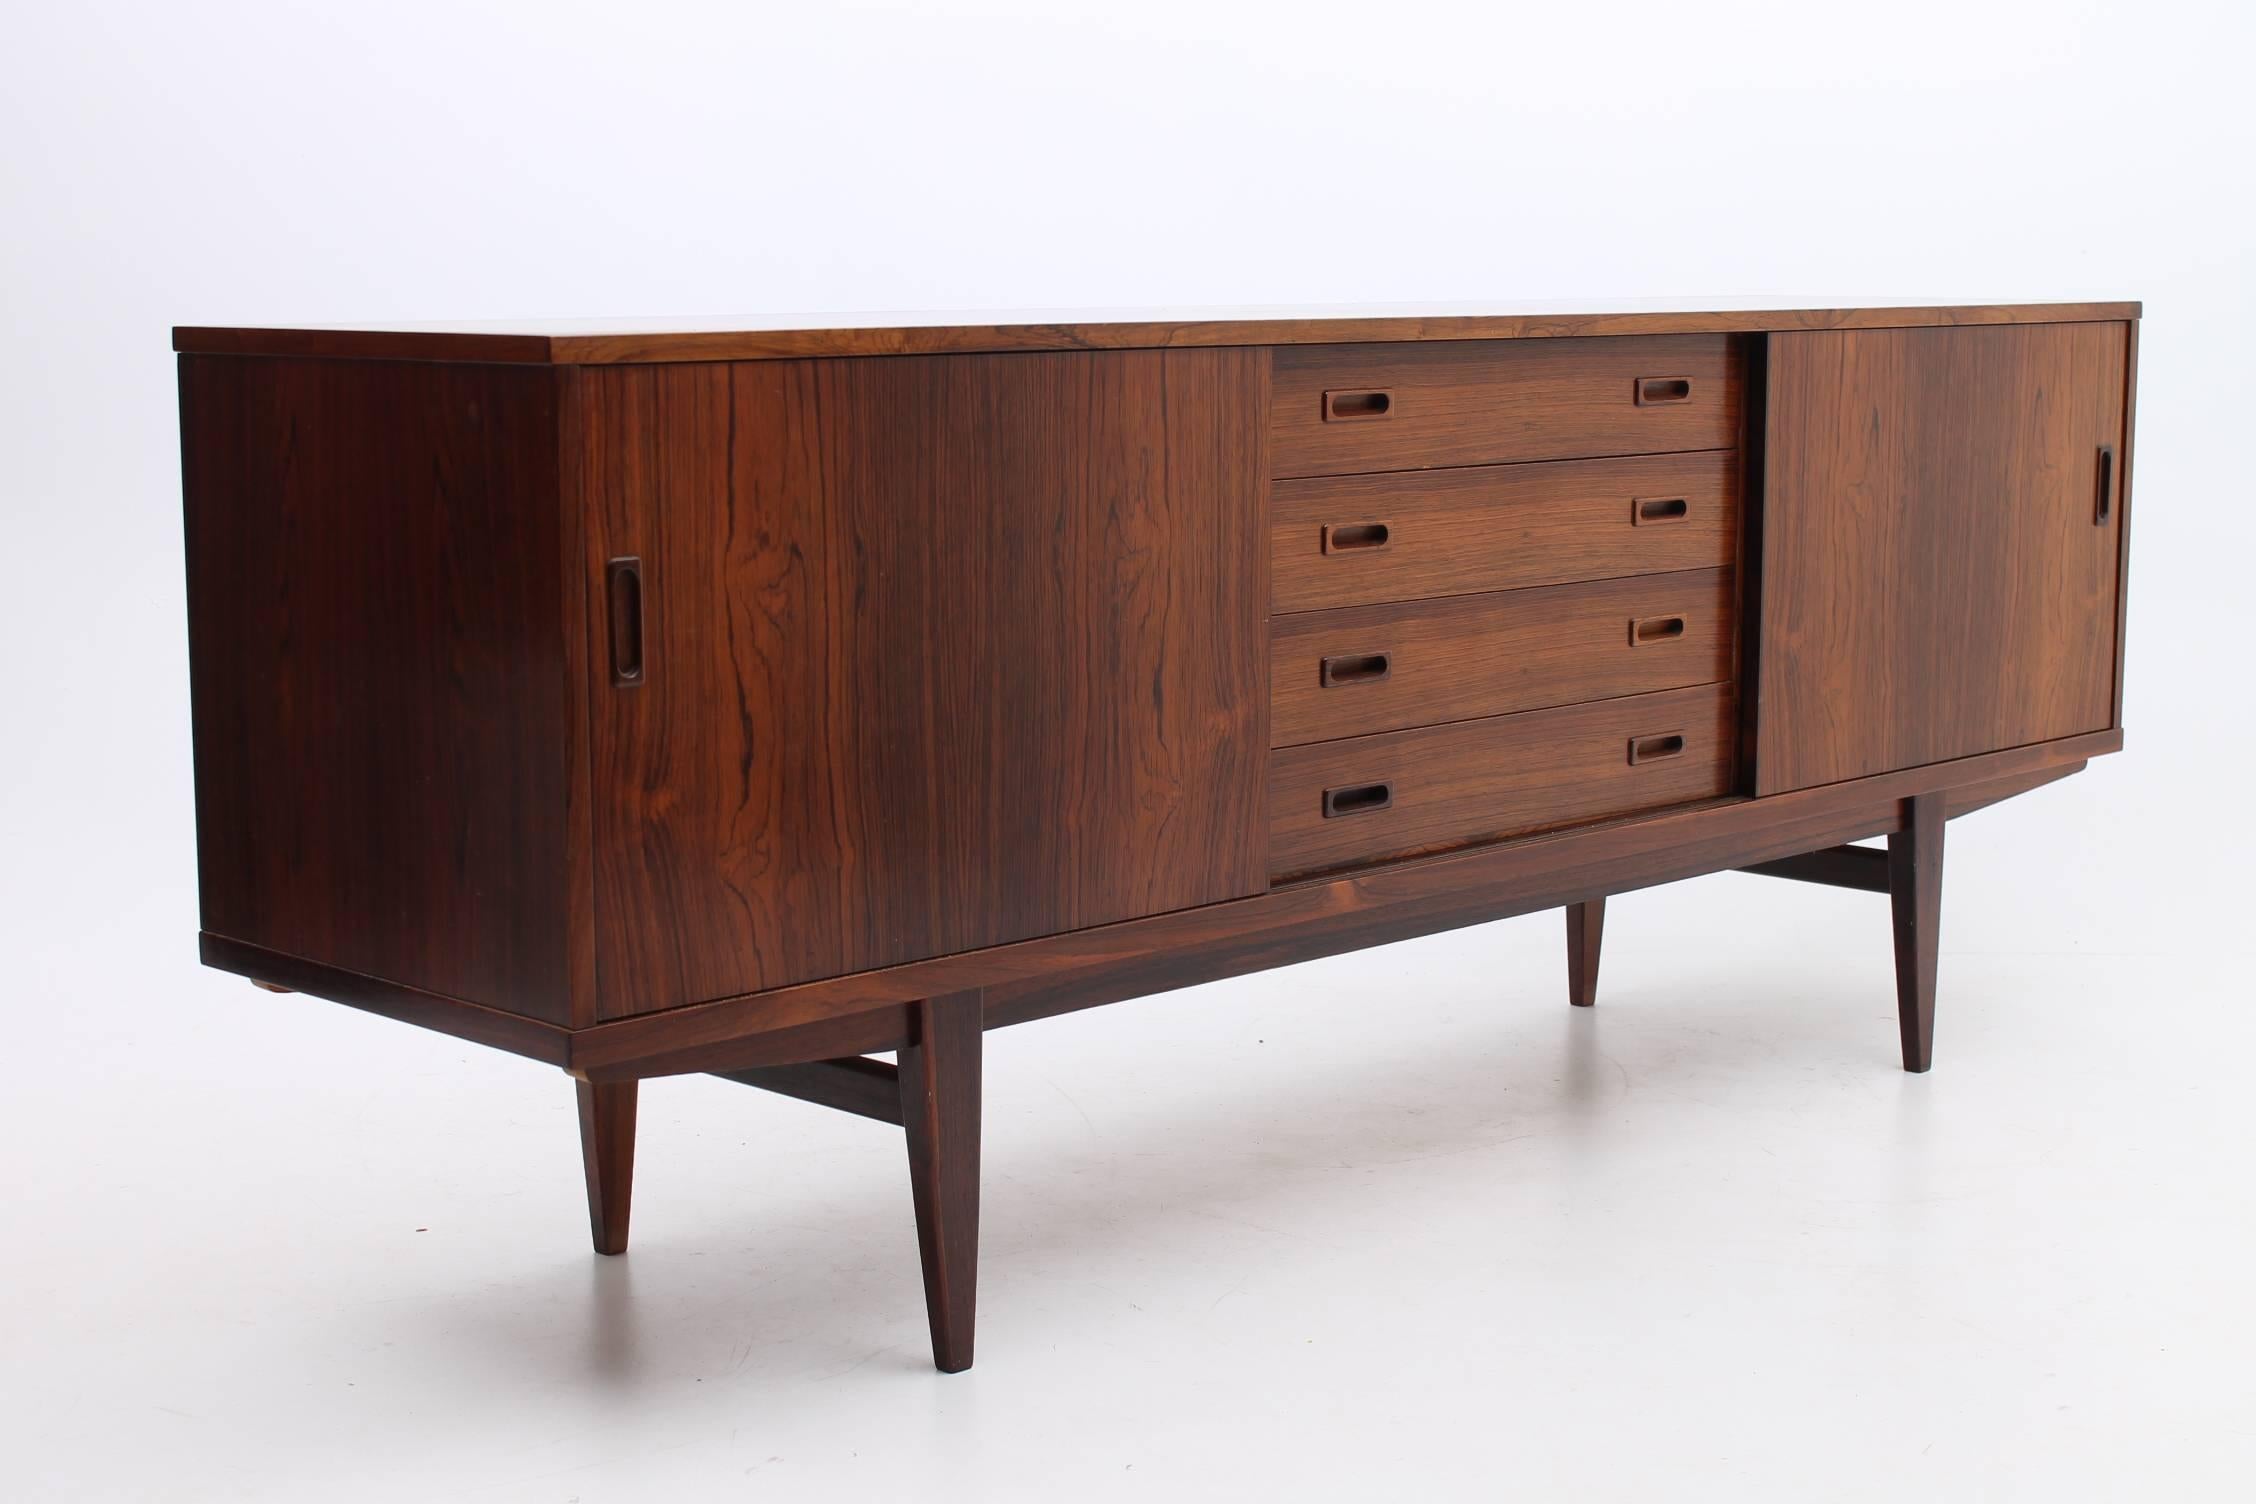 Beautiful rosewood credenza designed and manufactured by Lyby Mobler. This credenza has adjustable shelves on either sides and drawers in the middle. It also features handmade handles and the rosewood grain is thick wood grain. This credenza has